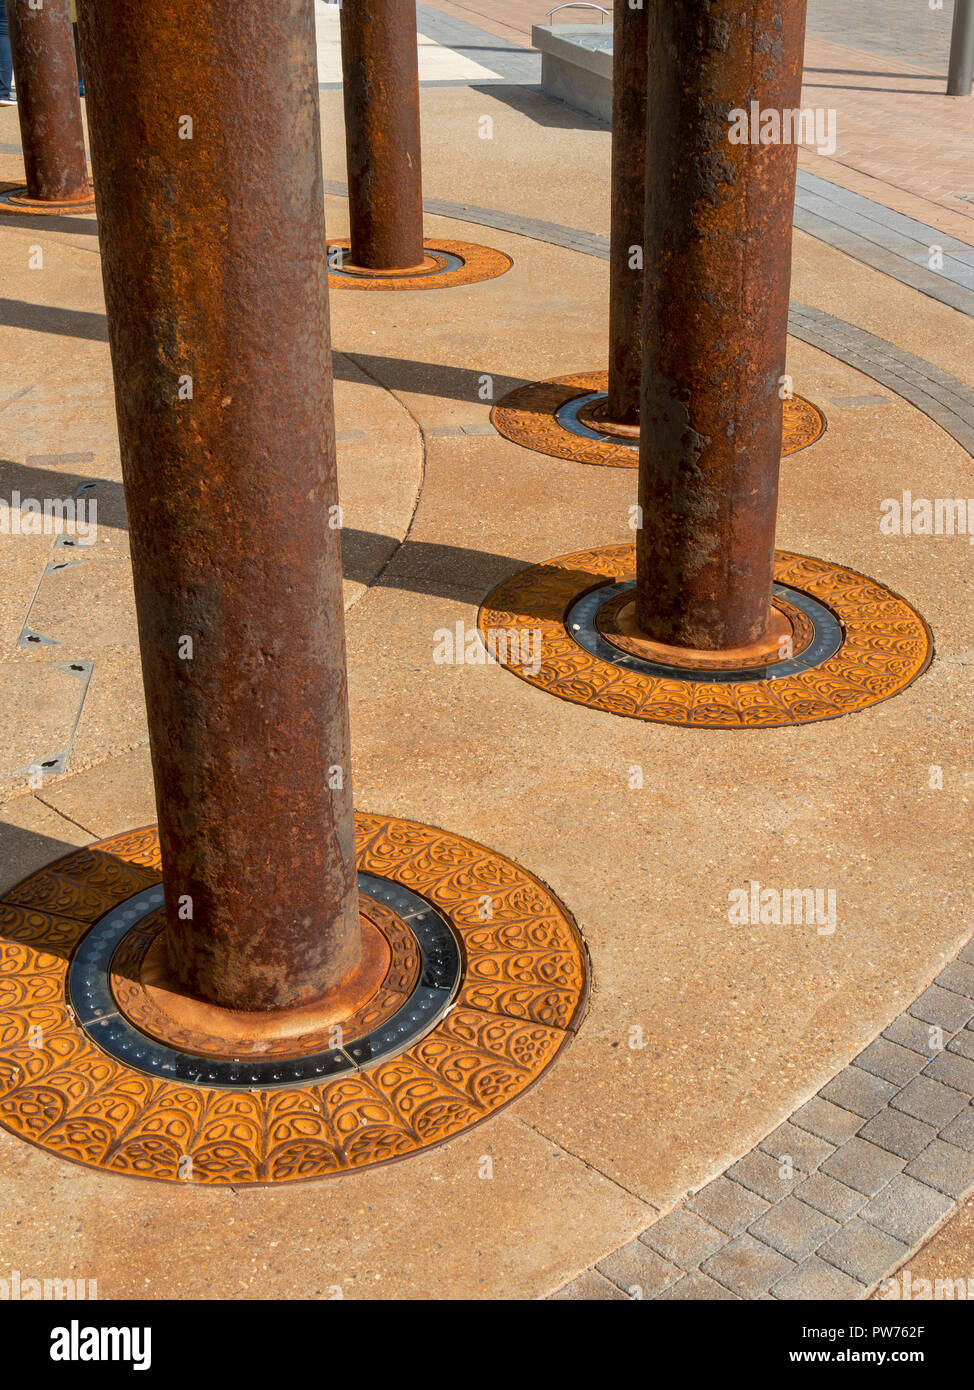 Detail of Golden Spiral sculpture made from cast iron columns salvaged from the old West Pier, Brighton Promenade Piazza, East Sussex, England, UK Stock Photo